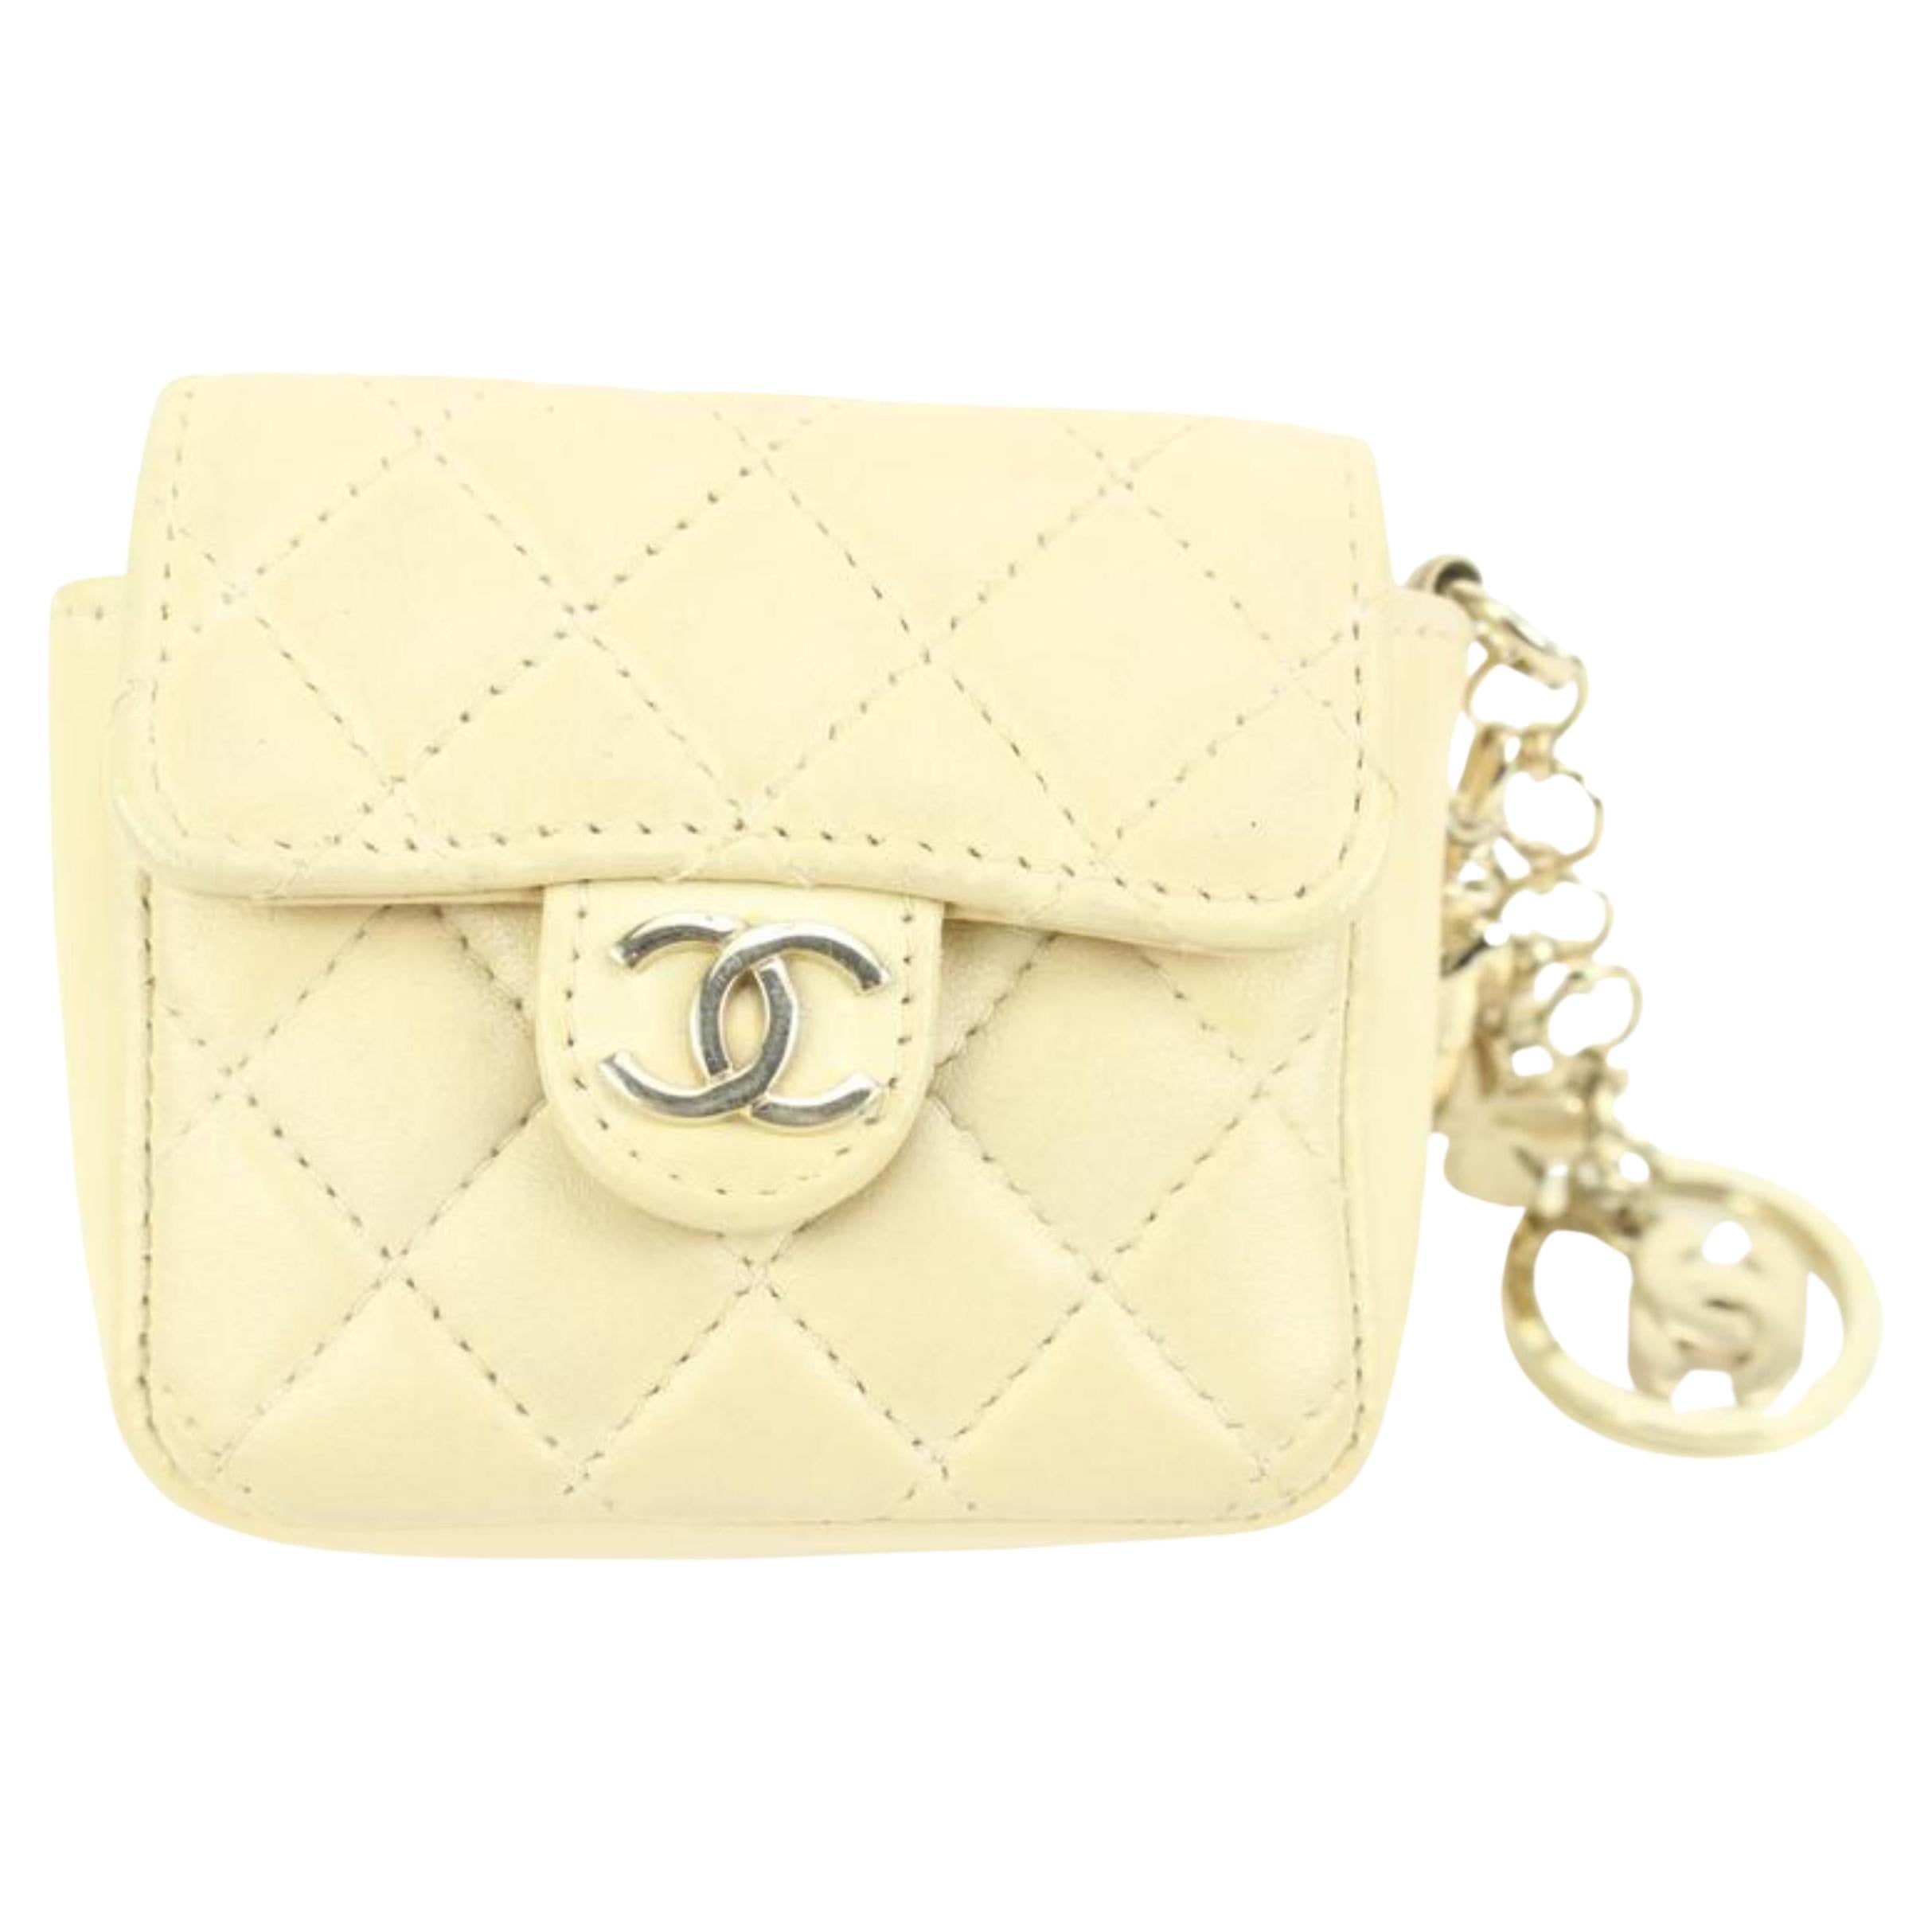 Chanel Light Beige Cream Quilted Leather Micro Flap Charm Bag Mini 48cz47 For Sale